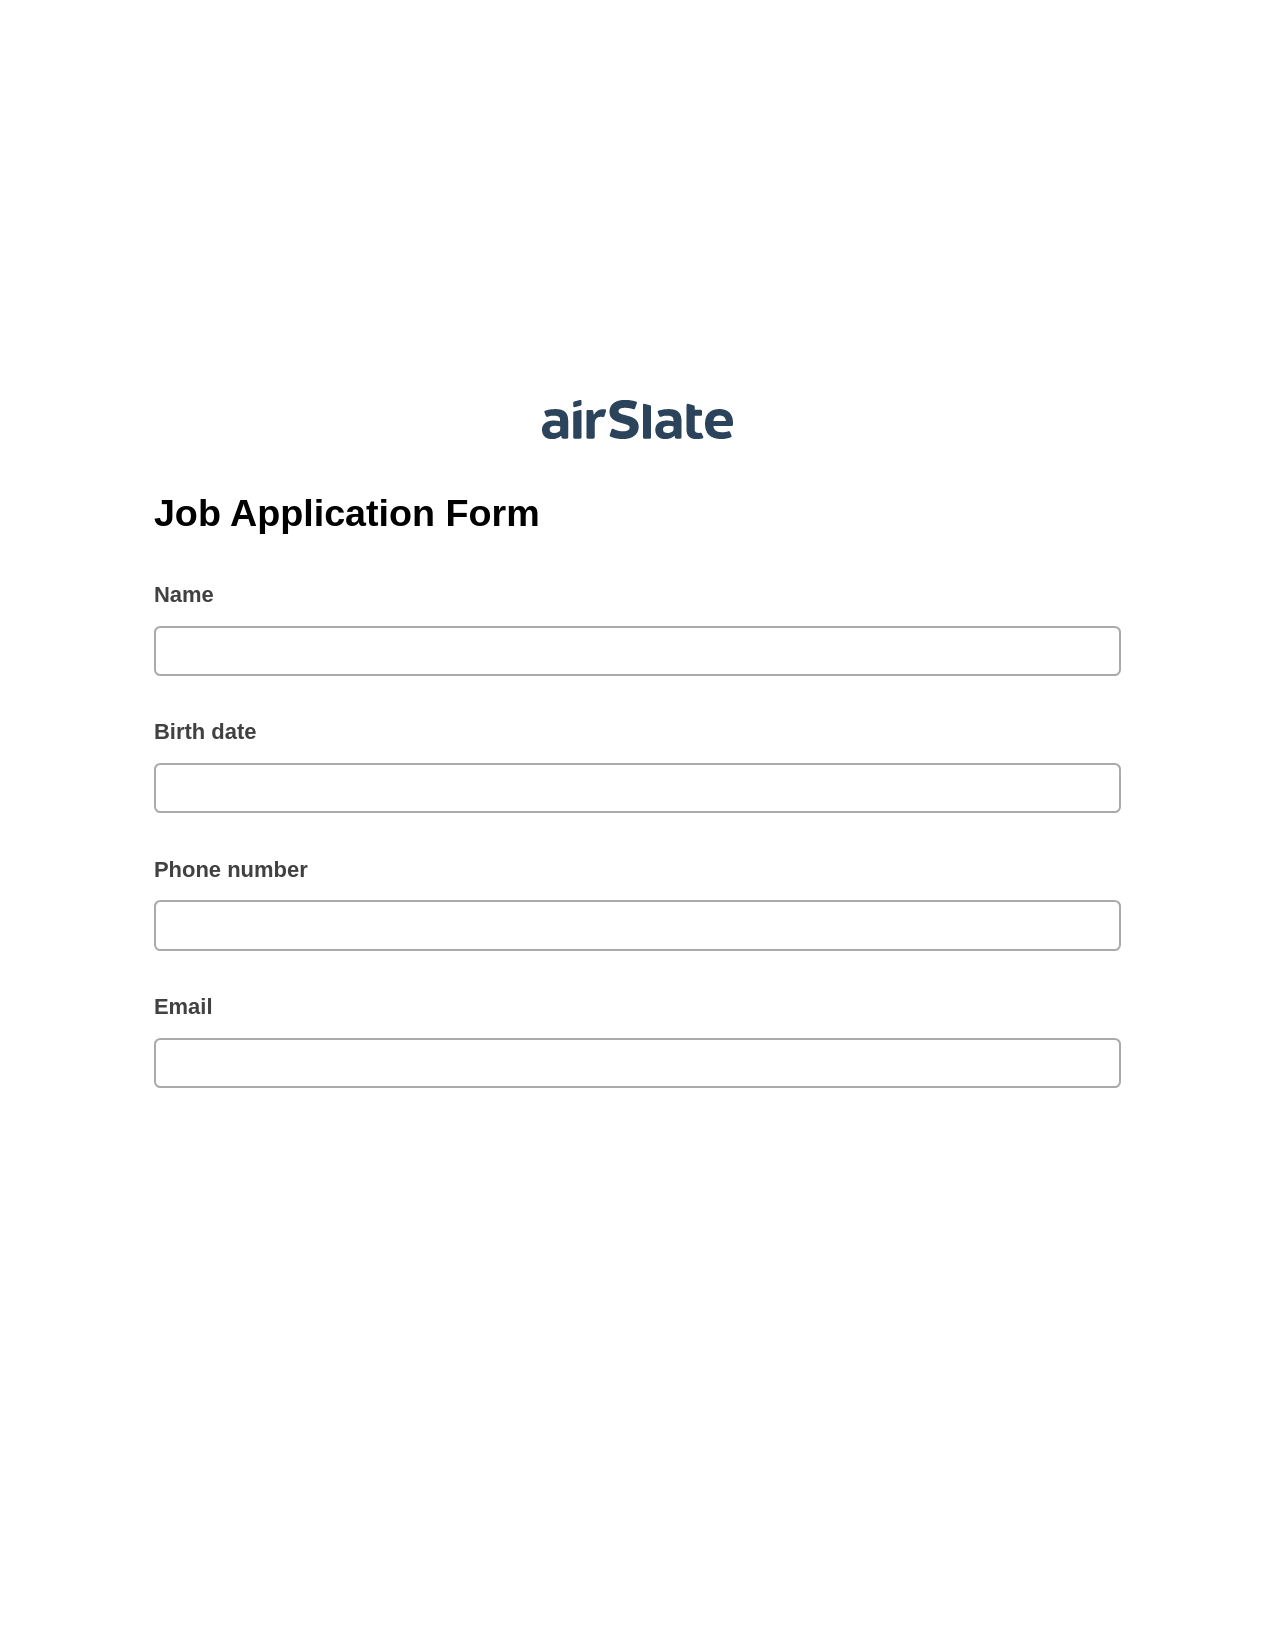 Job Application Form Pre-fill from Excel Spreadsheet Bot, Create NetSuite Records Bot, Export to MySQL Bot